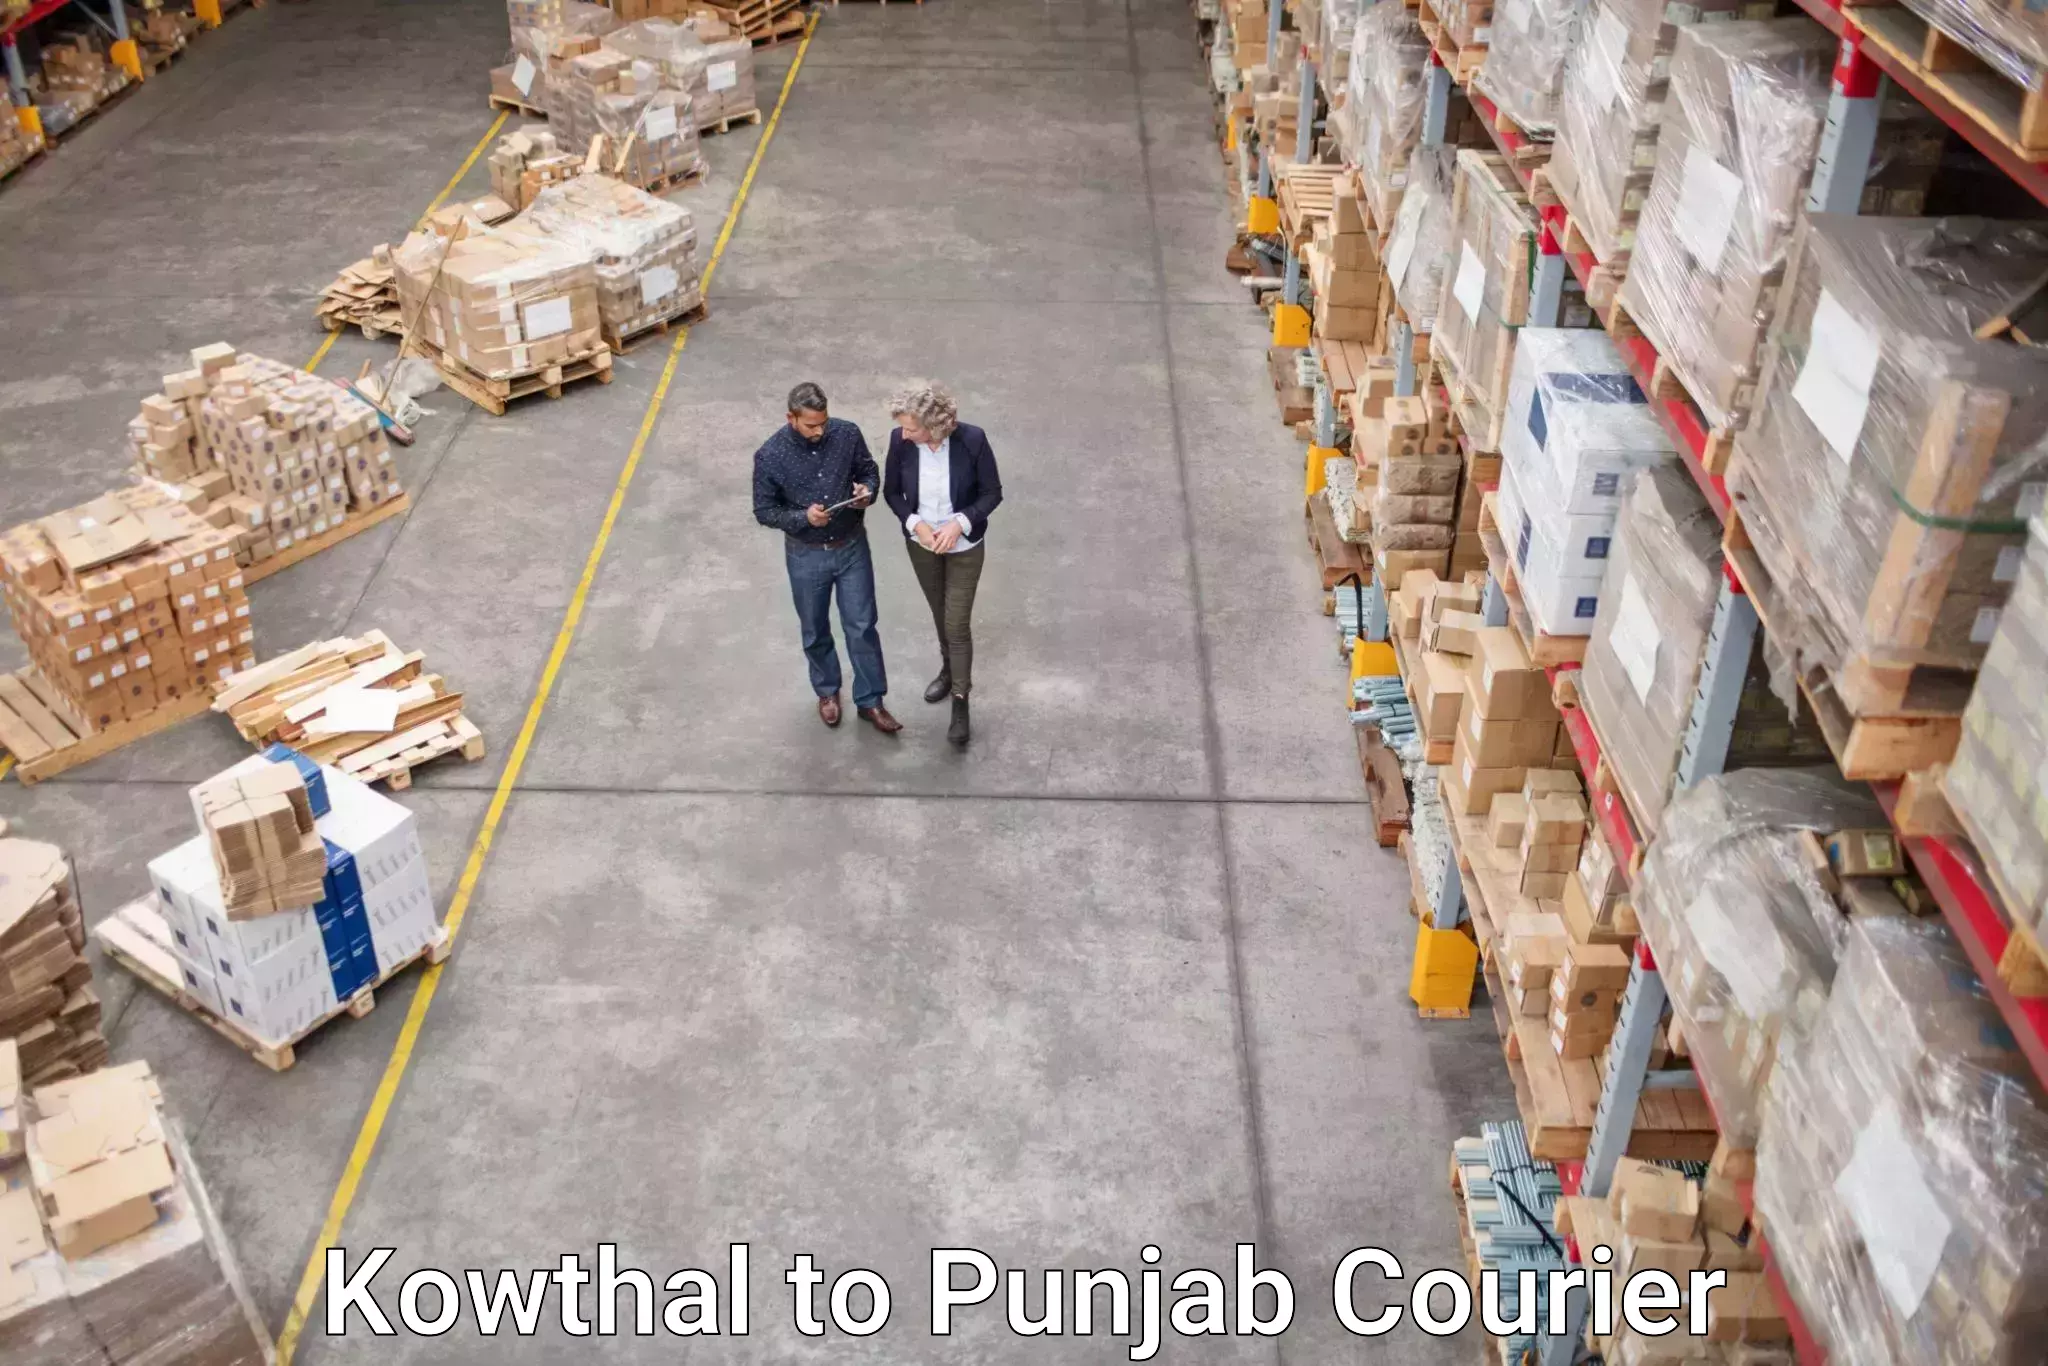 Round-the-clock parcel delivery Kowthal to Zirakpur